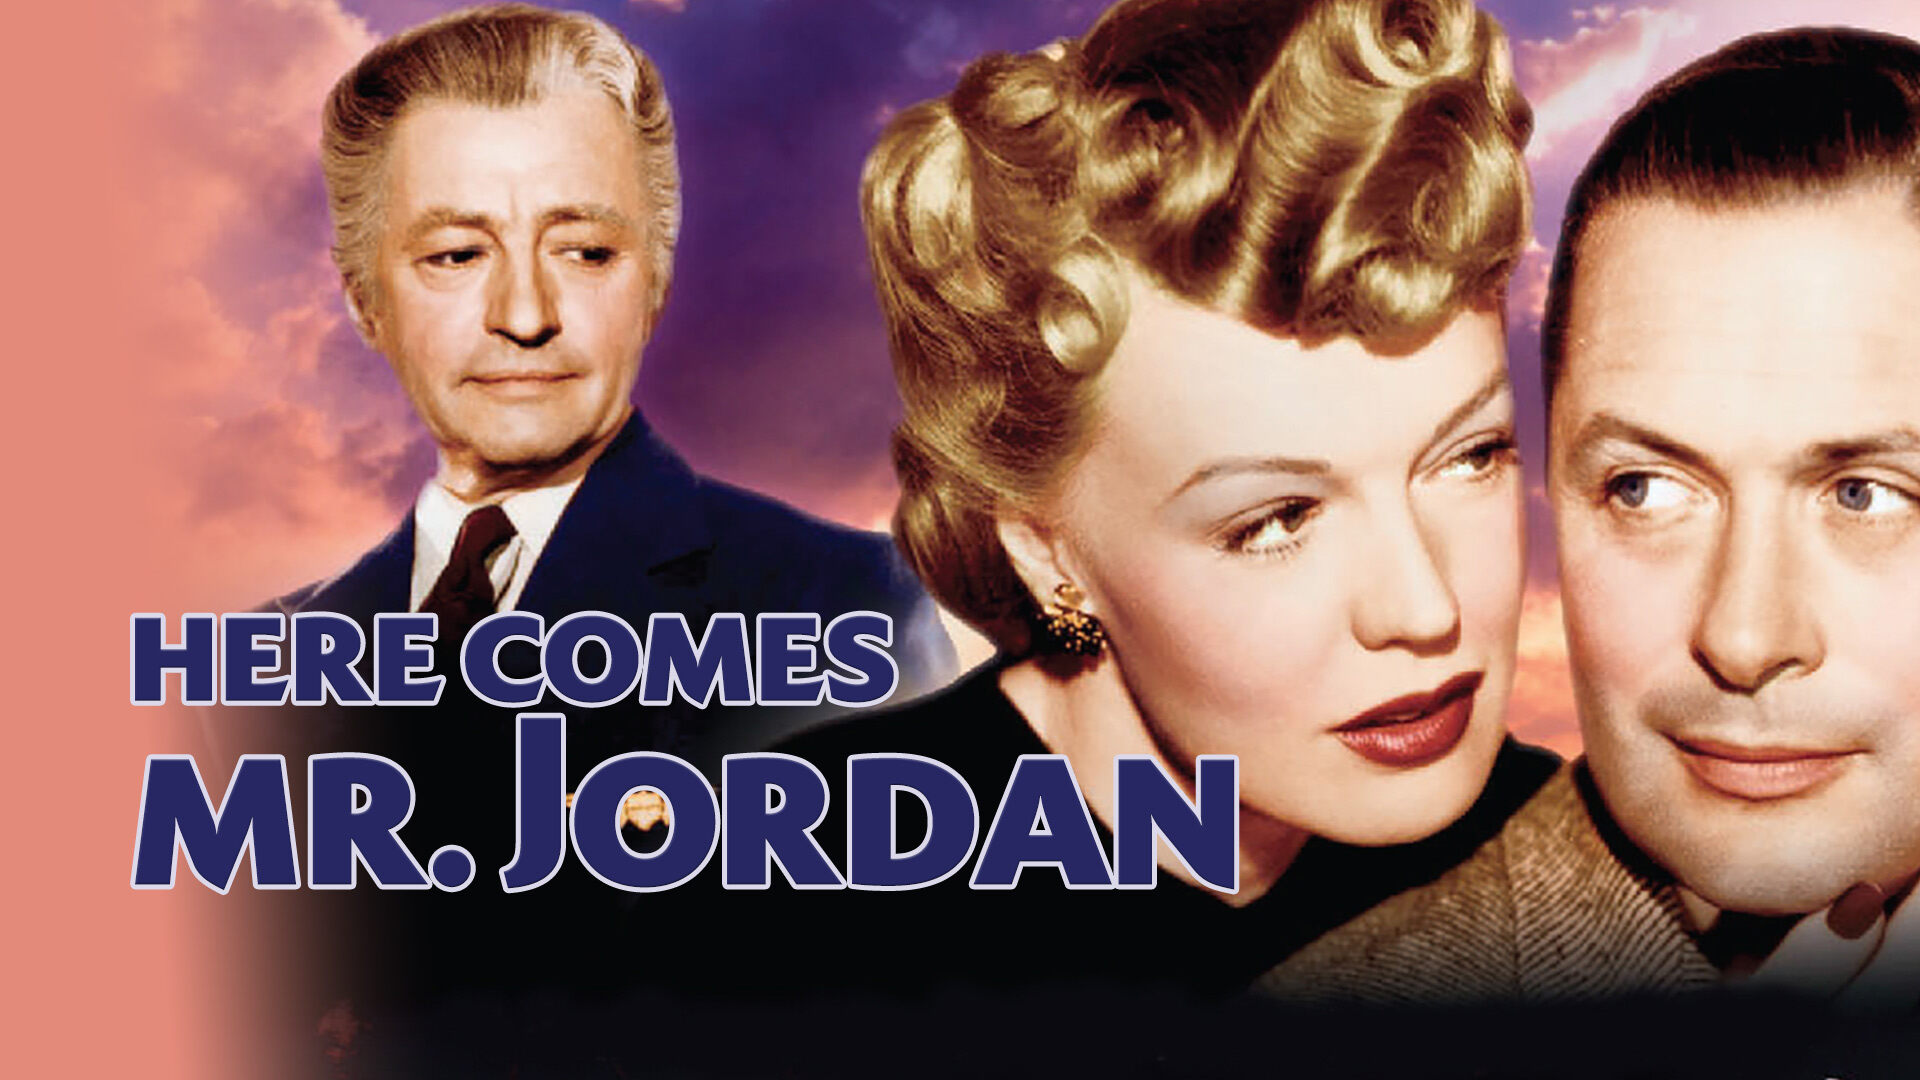 39-facts-about-the-movie-here-comes-mr-jordan